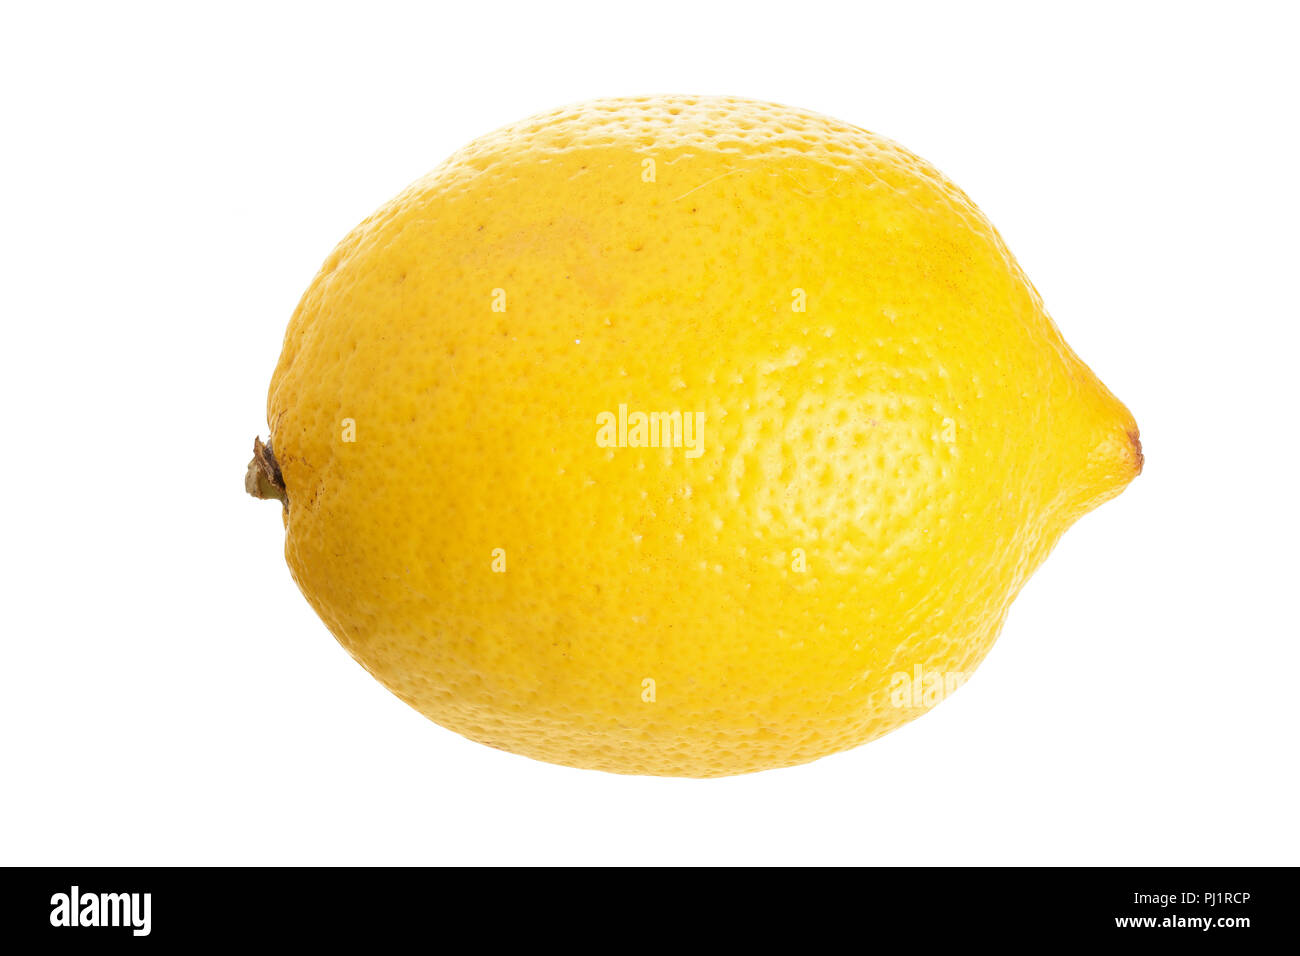 One lemon isolated on white background. Tropical fruit. Flat lay, top view. Stock Photo